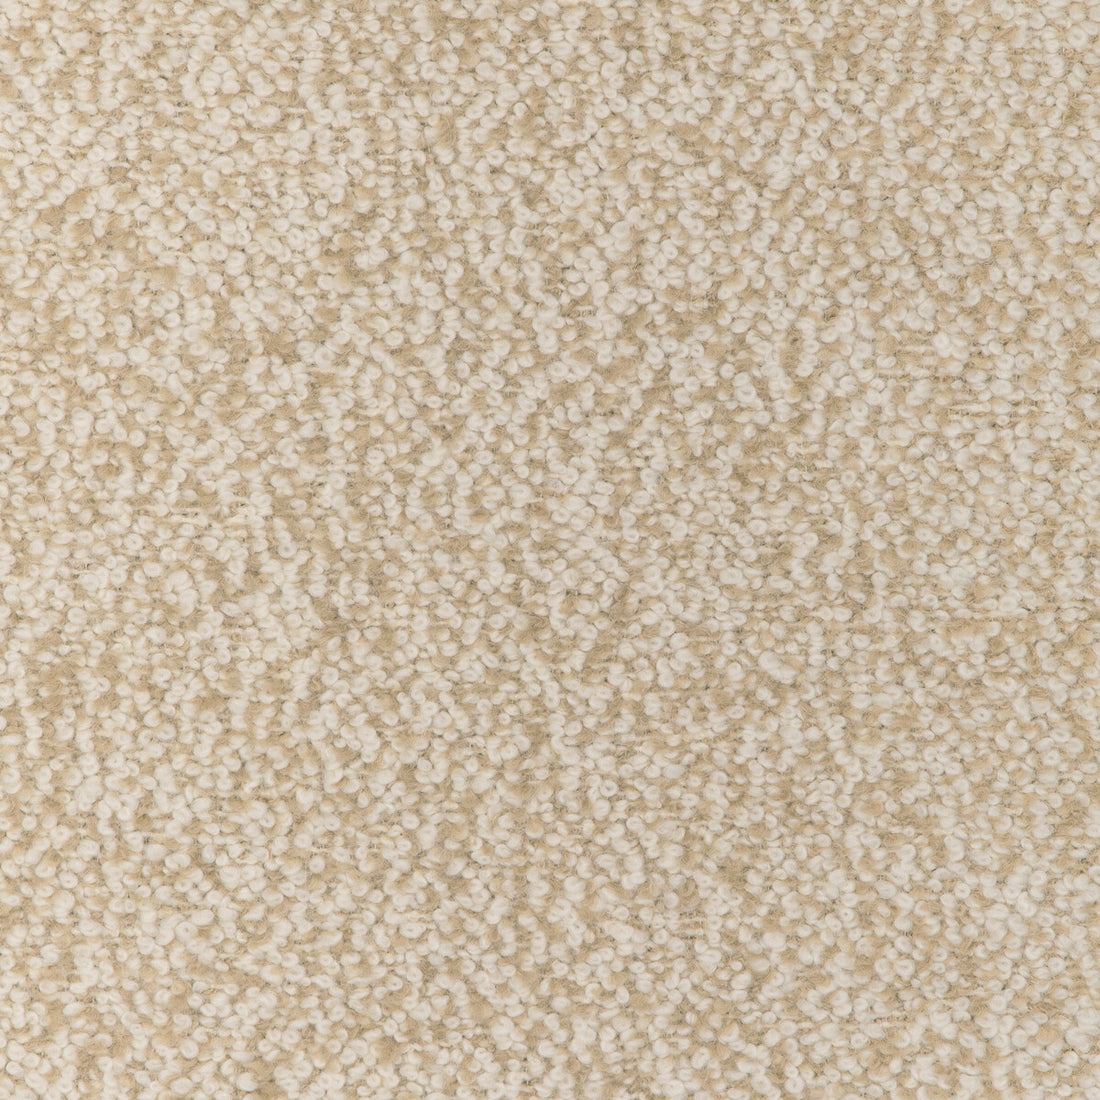 Alpaca Boucle fabric in camel color - pattern 36898.16.0 - by Kravet Couture in the Atelier Weaves collection